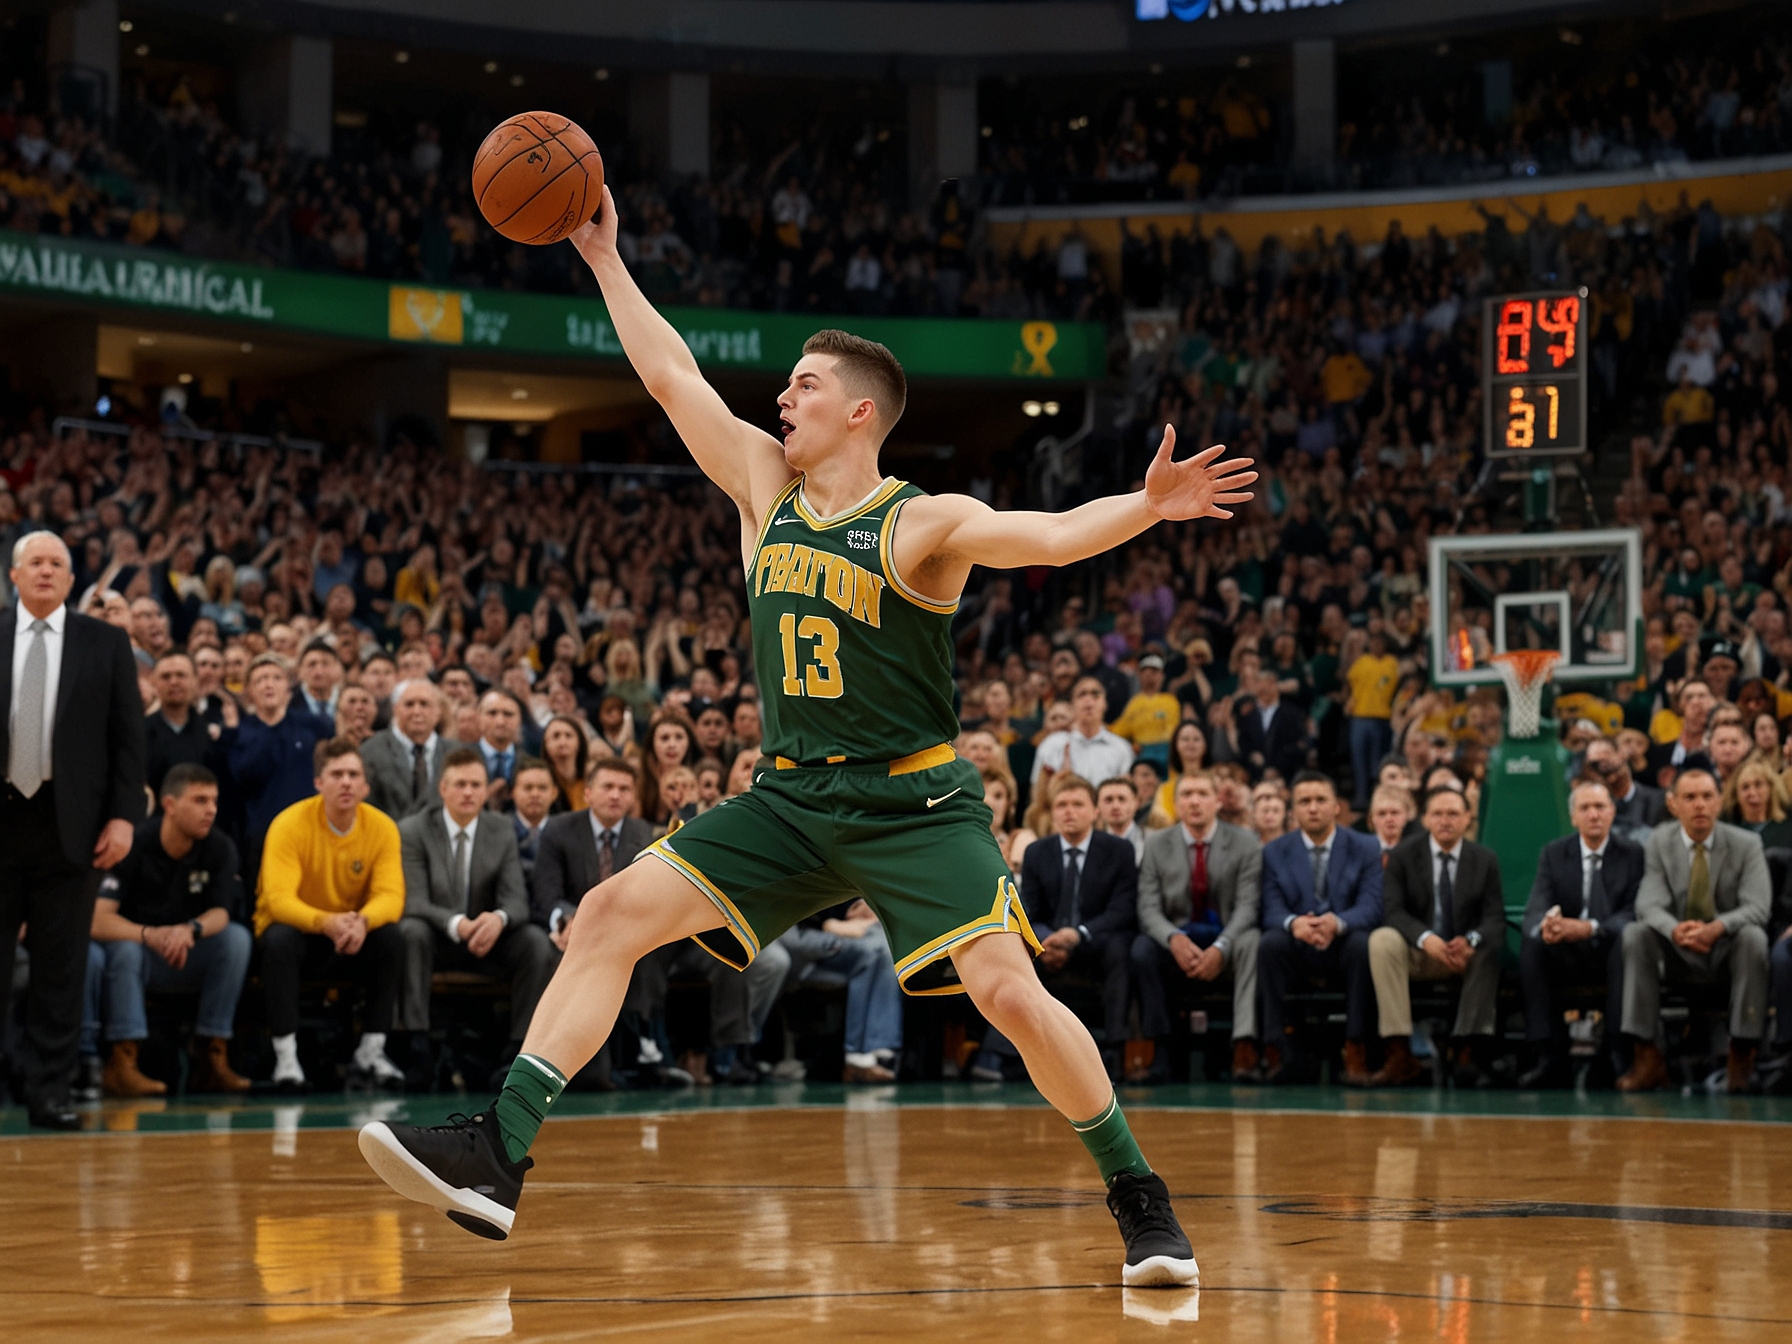 Payton Pritchard mid-action, launching his remarkable half-court buzzer-beater, with the crowd in TD Garden holding their breath in anticipation as the ball soars towards the net.